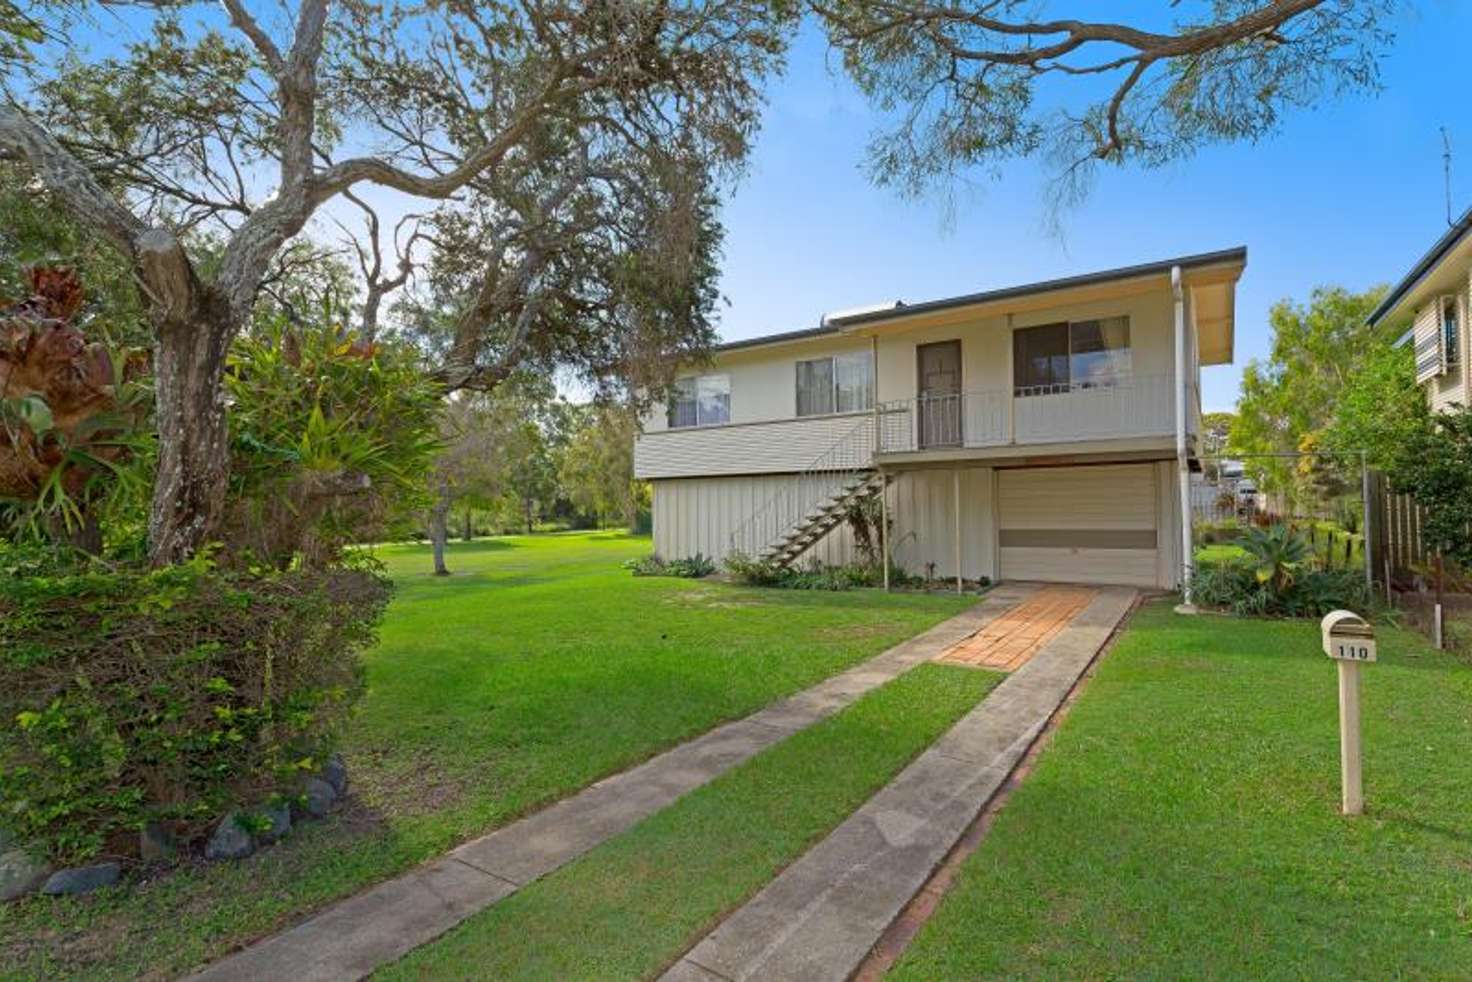 Main view of Homely house listing, 110 Dunbar St, Margate QLD 4019